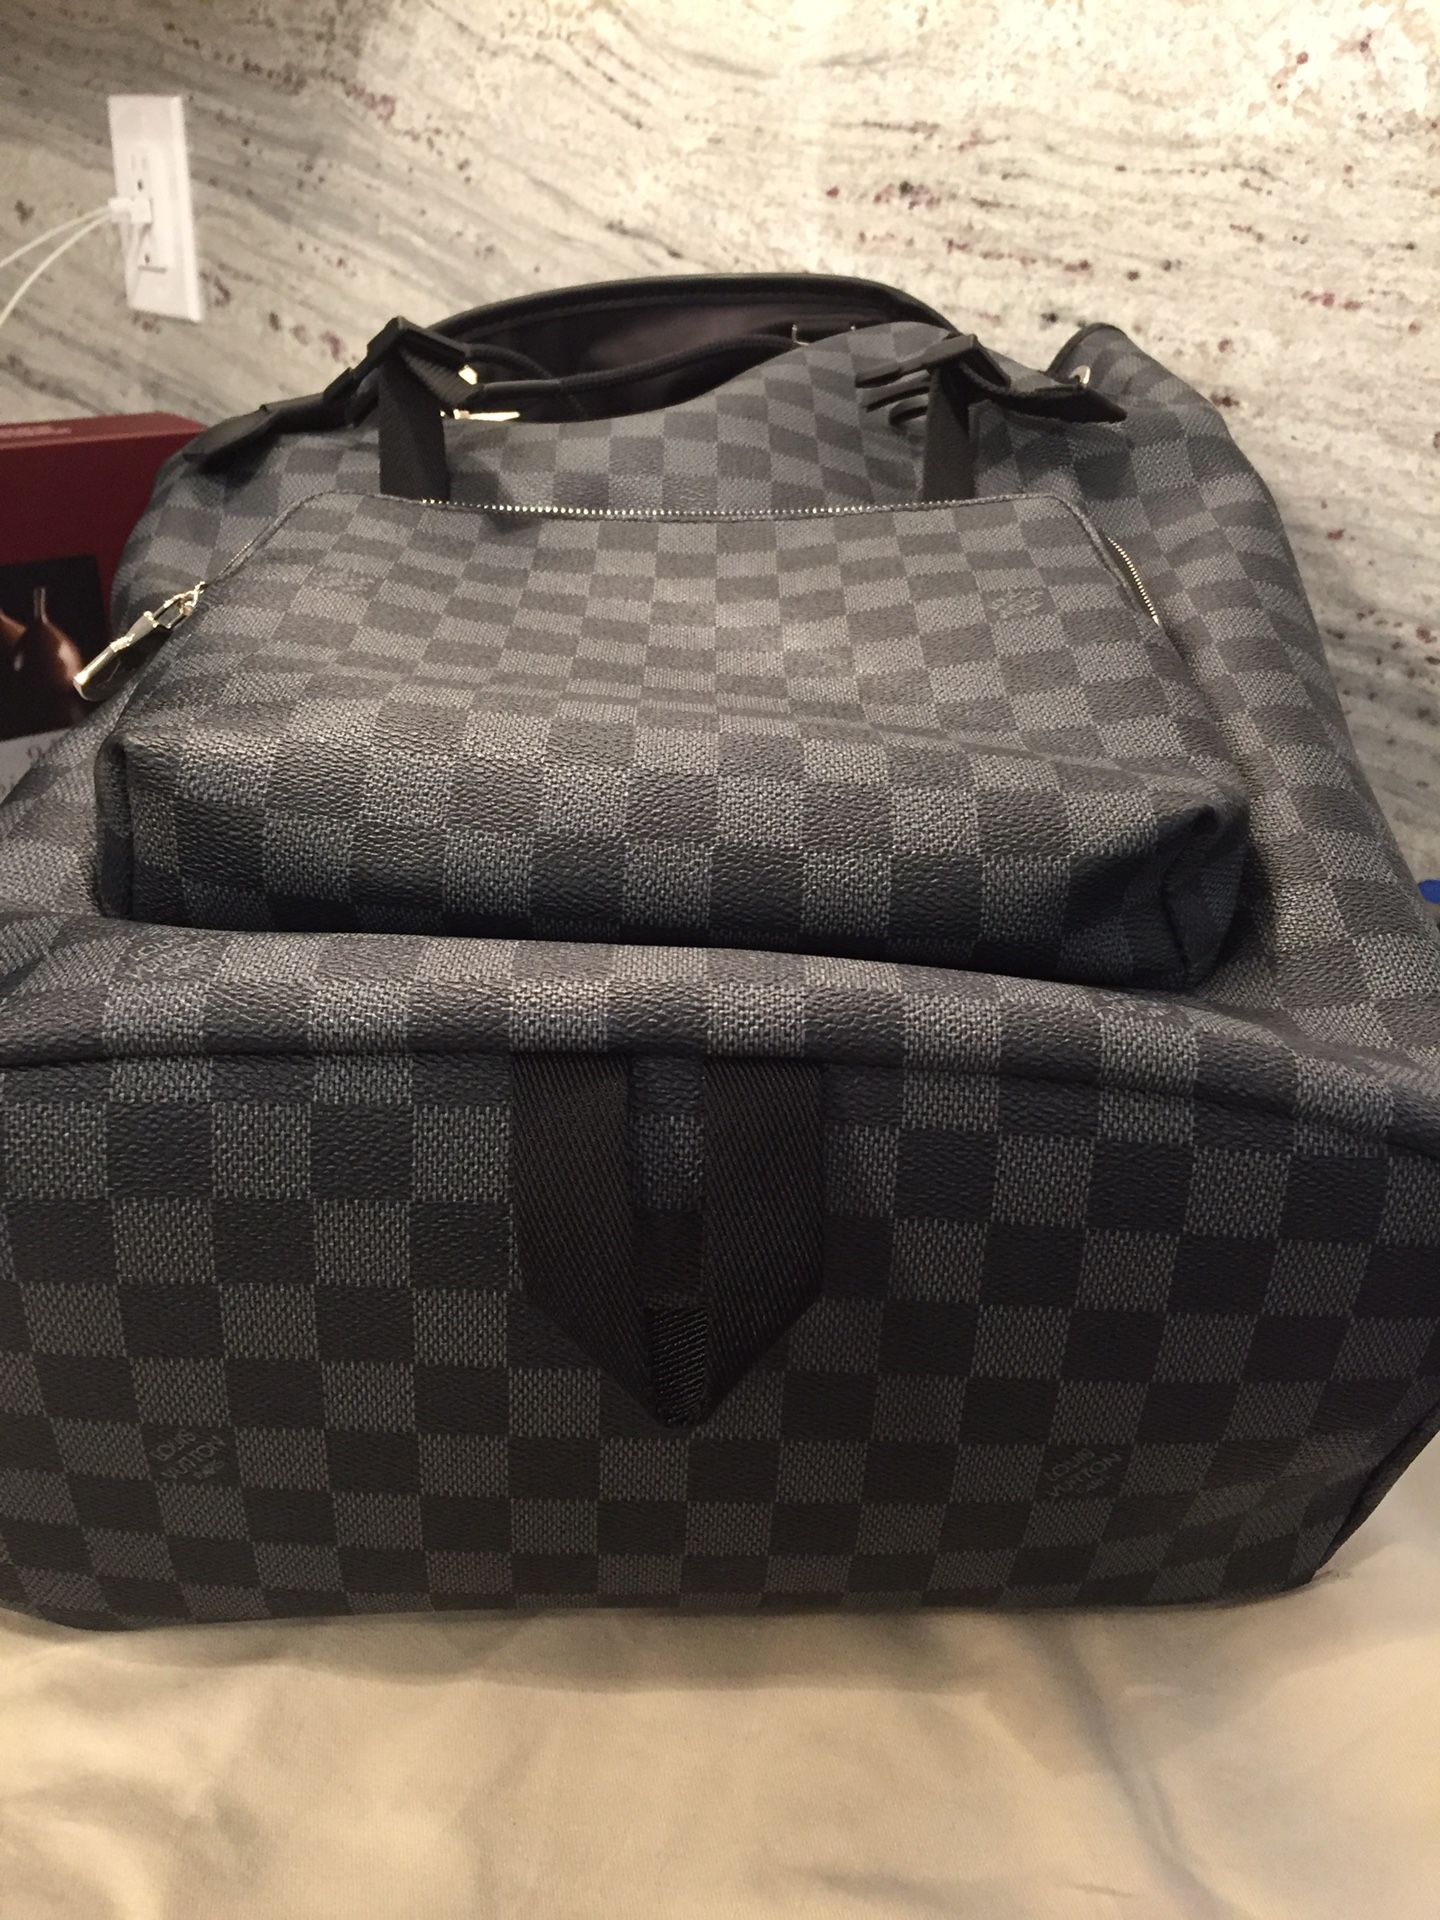 Louis Vuitton Backpack for Sale in Woodway, WA - OfferUp